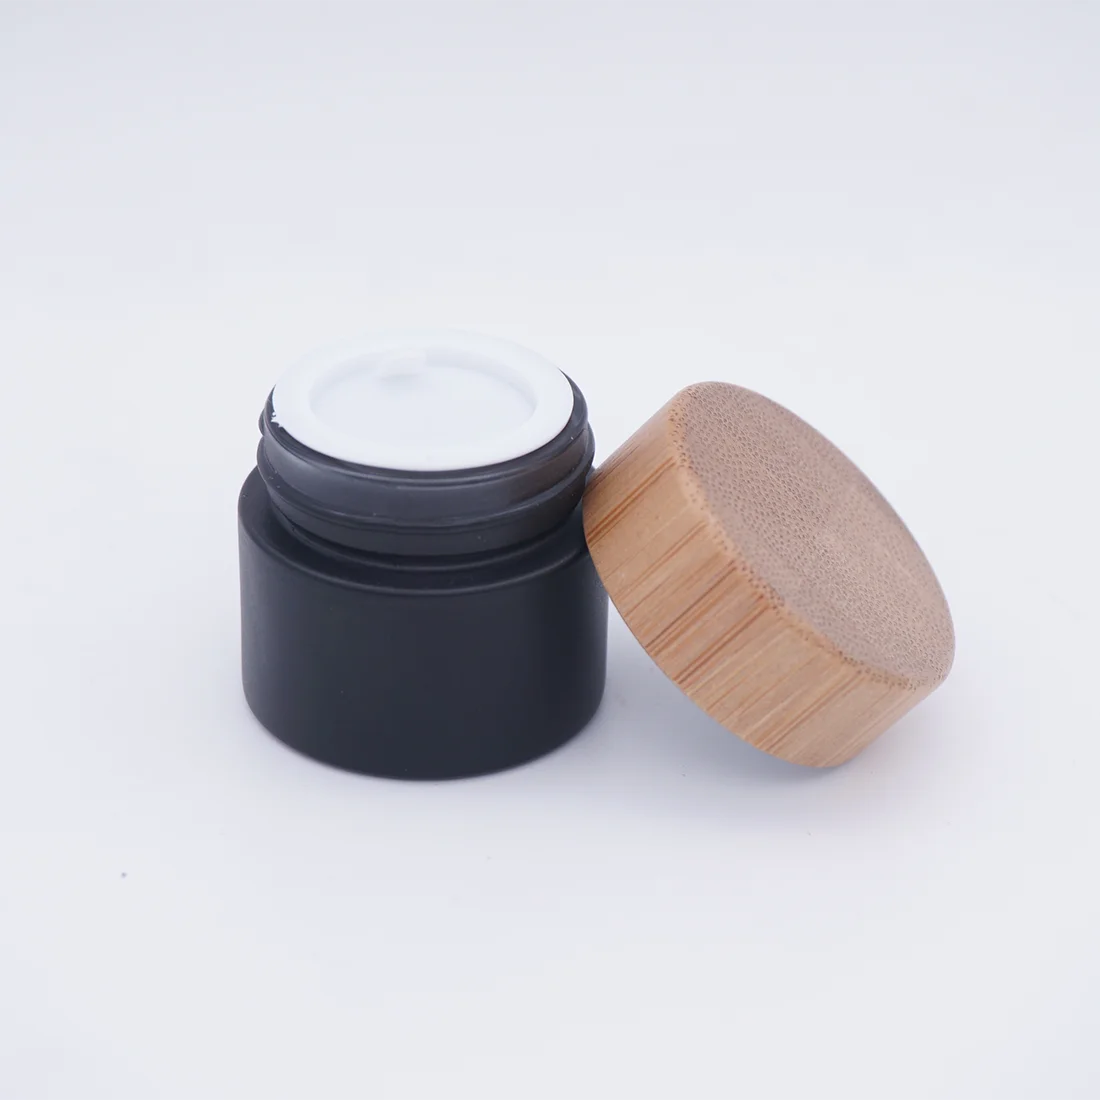 Matte Black Glass Cream Containers Cosmetic Jar With Bamboo Lid Buy Cream Containers Cosmetic Glass Cream Containers Cosmetic Black Cream Containers Cosmetic Product On Alibaba Com